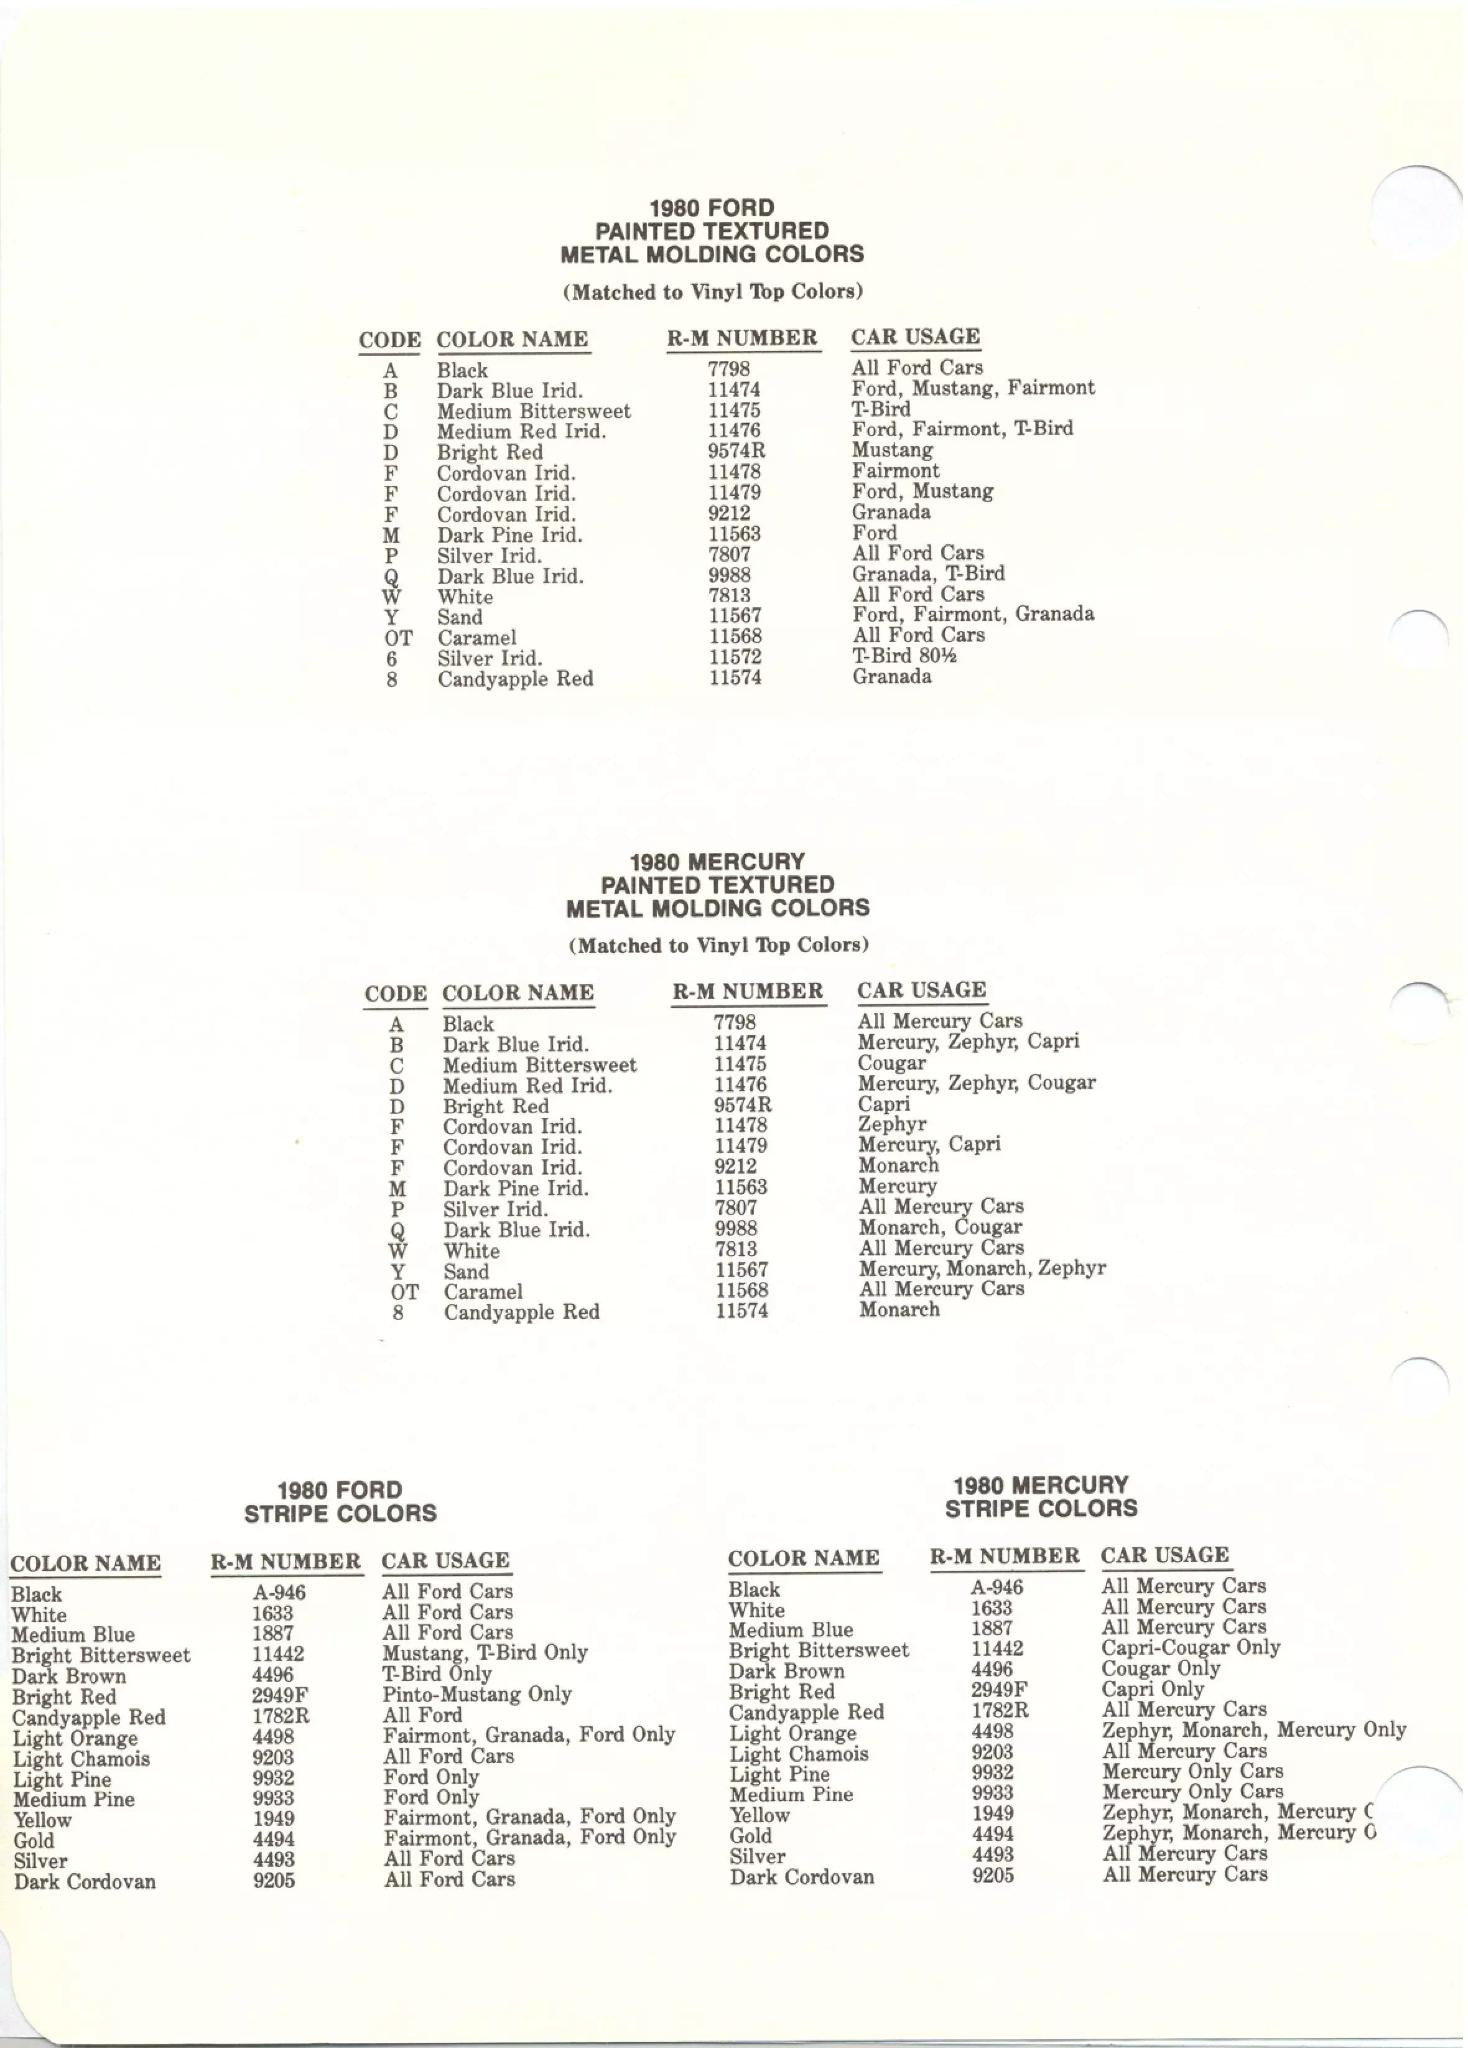 List Containing all the colors used on Ford and Mercury vehicles in 1980